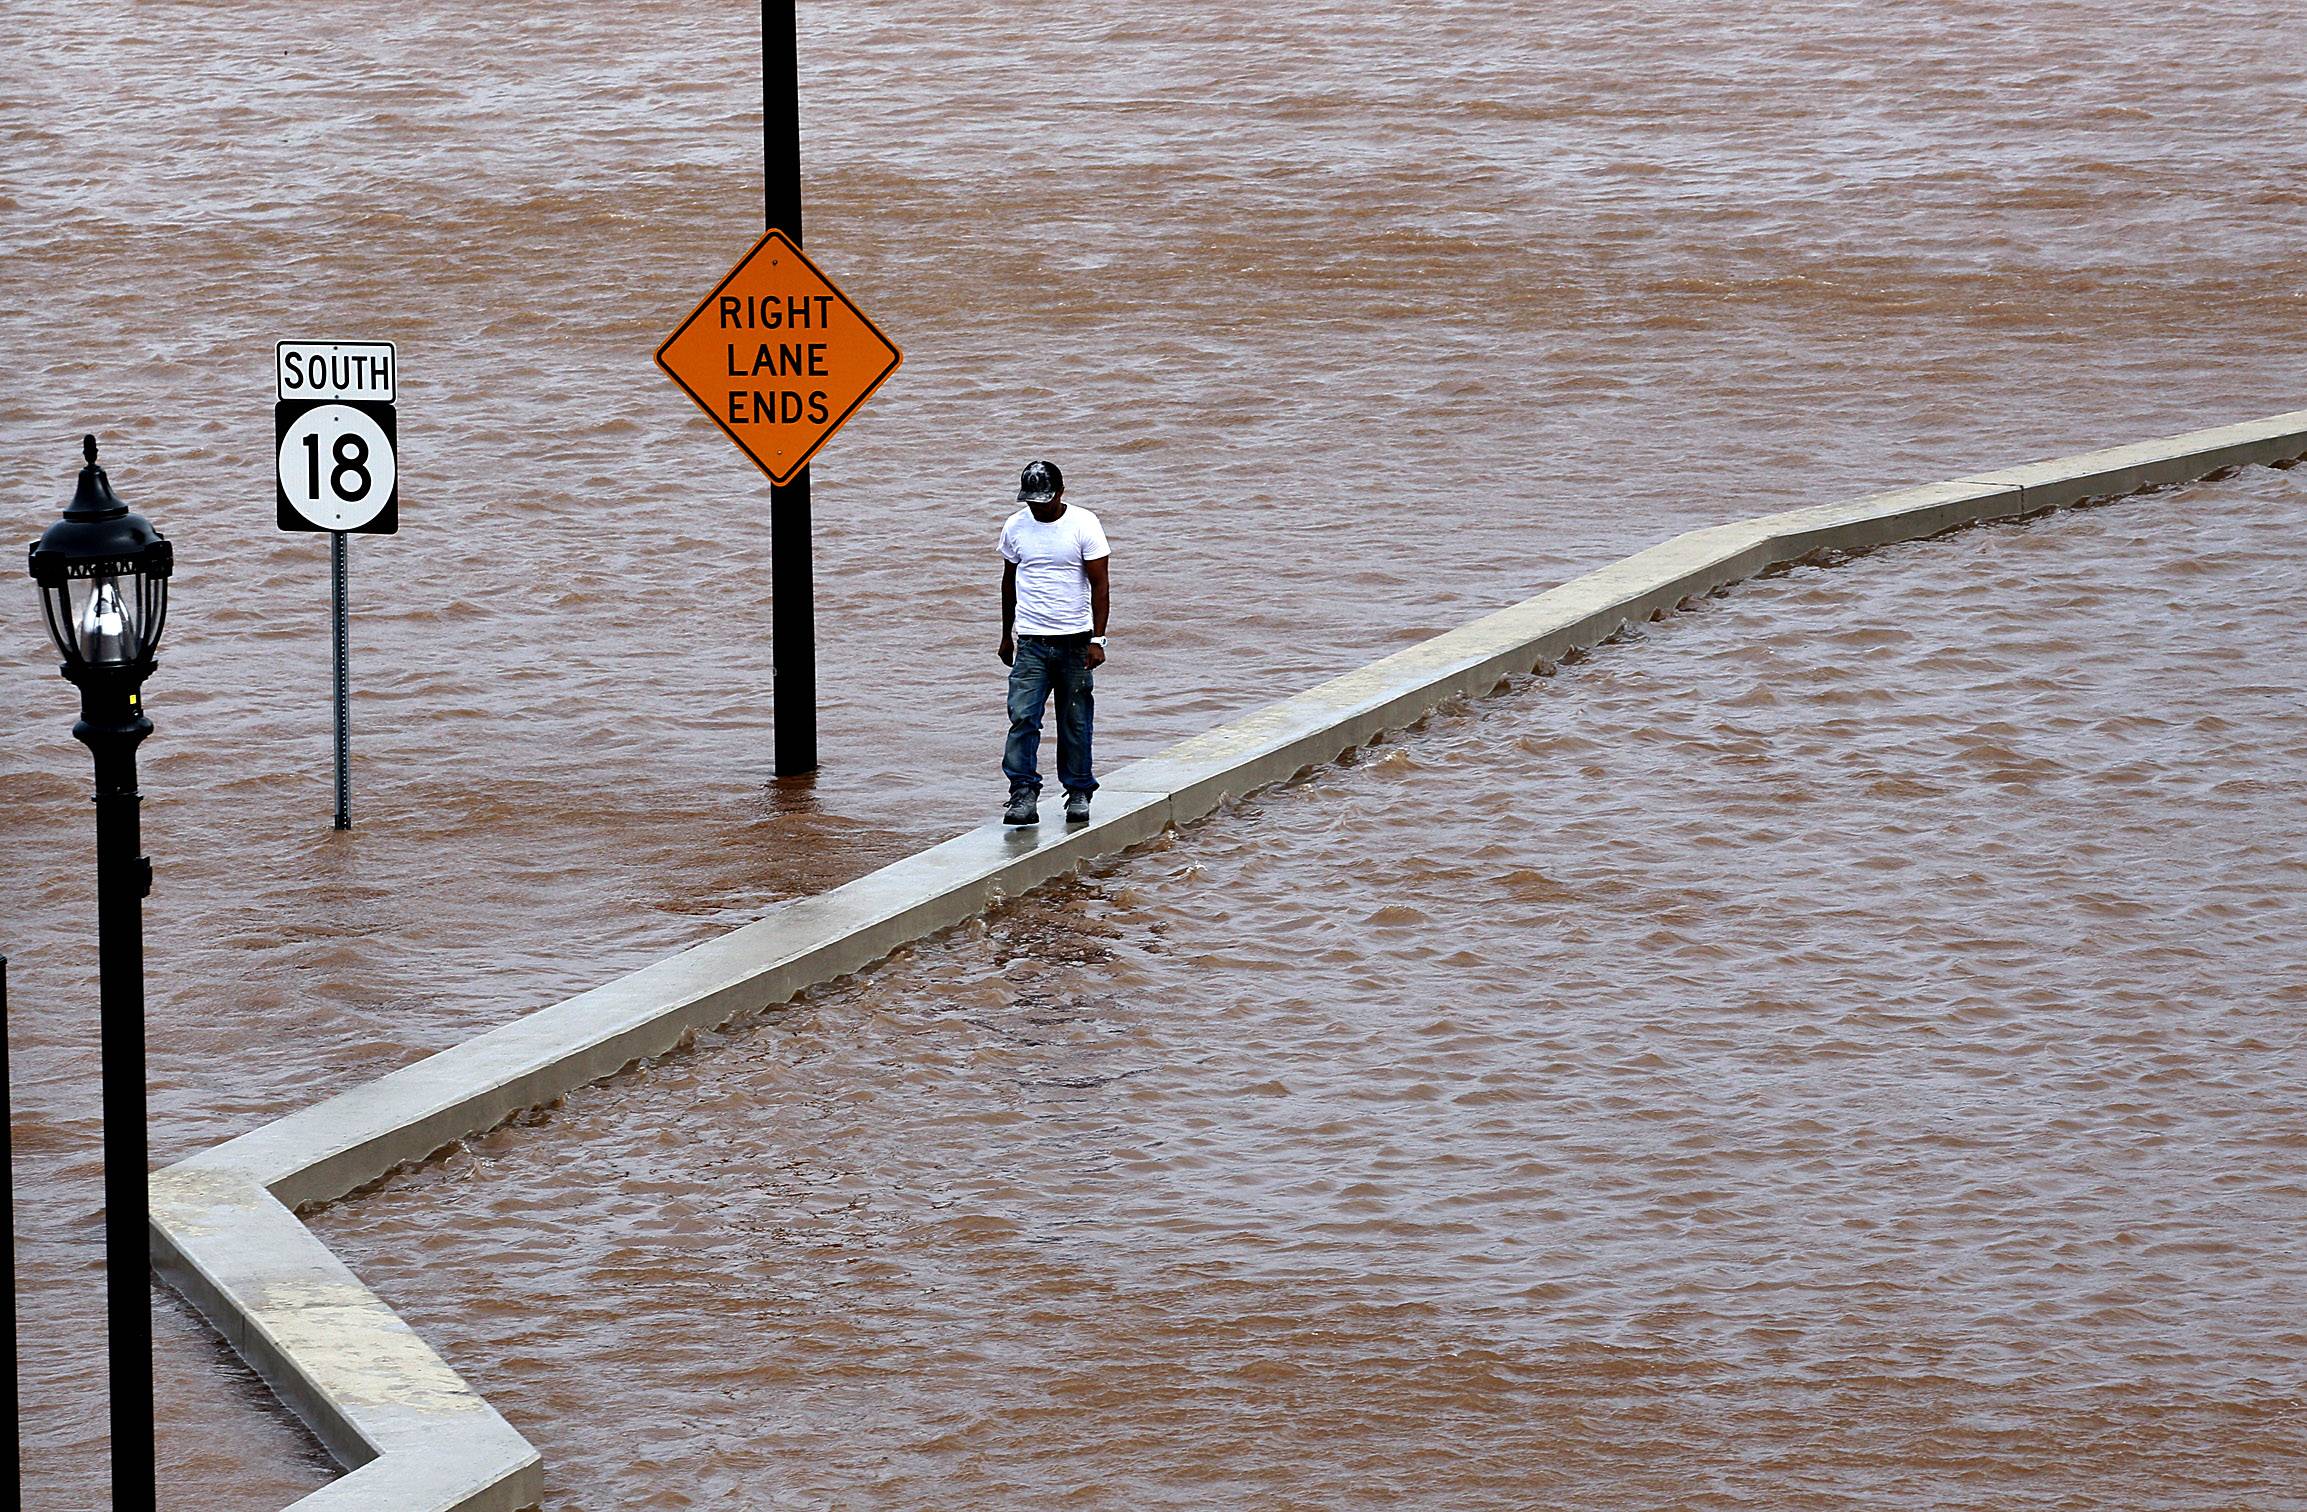 Irene Floods Highways  - A man walks on top of a wall next to a flooded highway in New Brunswick, New Jersey on Aug. 28, 2011, as heavy rains left by Hurricane Irene cause inland flooding of rivers and streams. Flood waters rose all across New Jersey on Sunday, closing roads from side streets to major highways as Hurricane Irene weakened and moved on, leaving 600,000 homes and businesses without power.(Photo: AP Photo/Mel Evans)